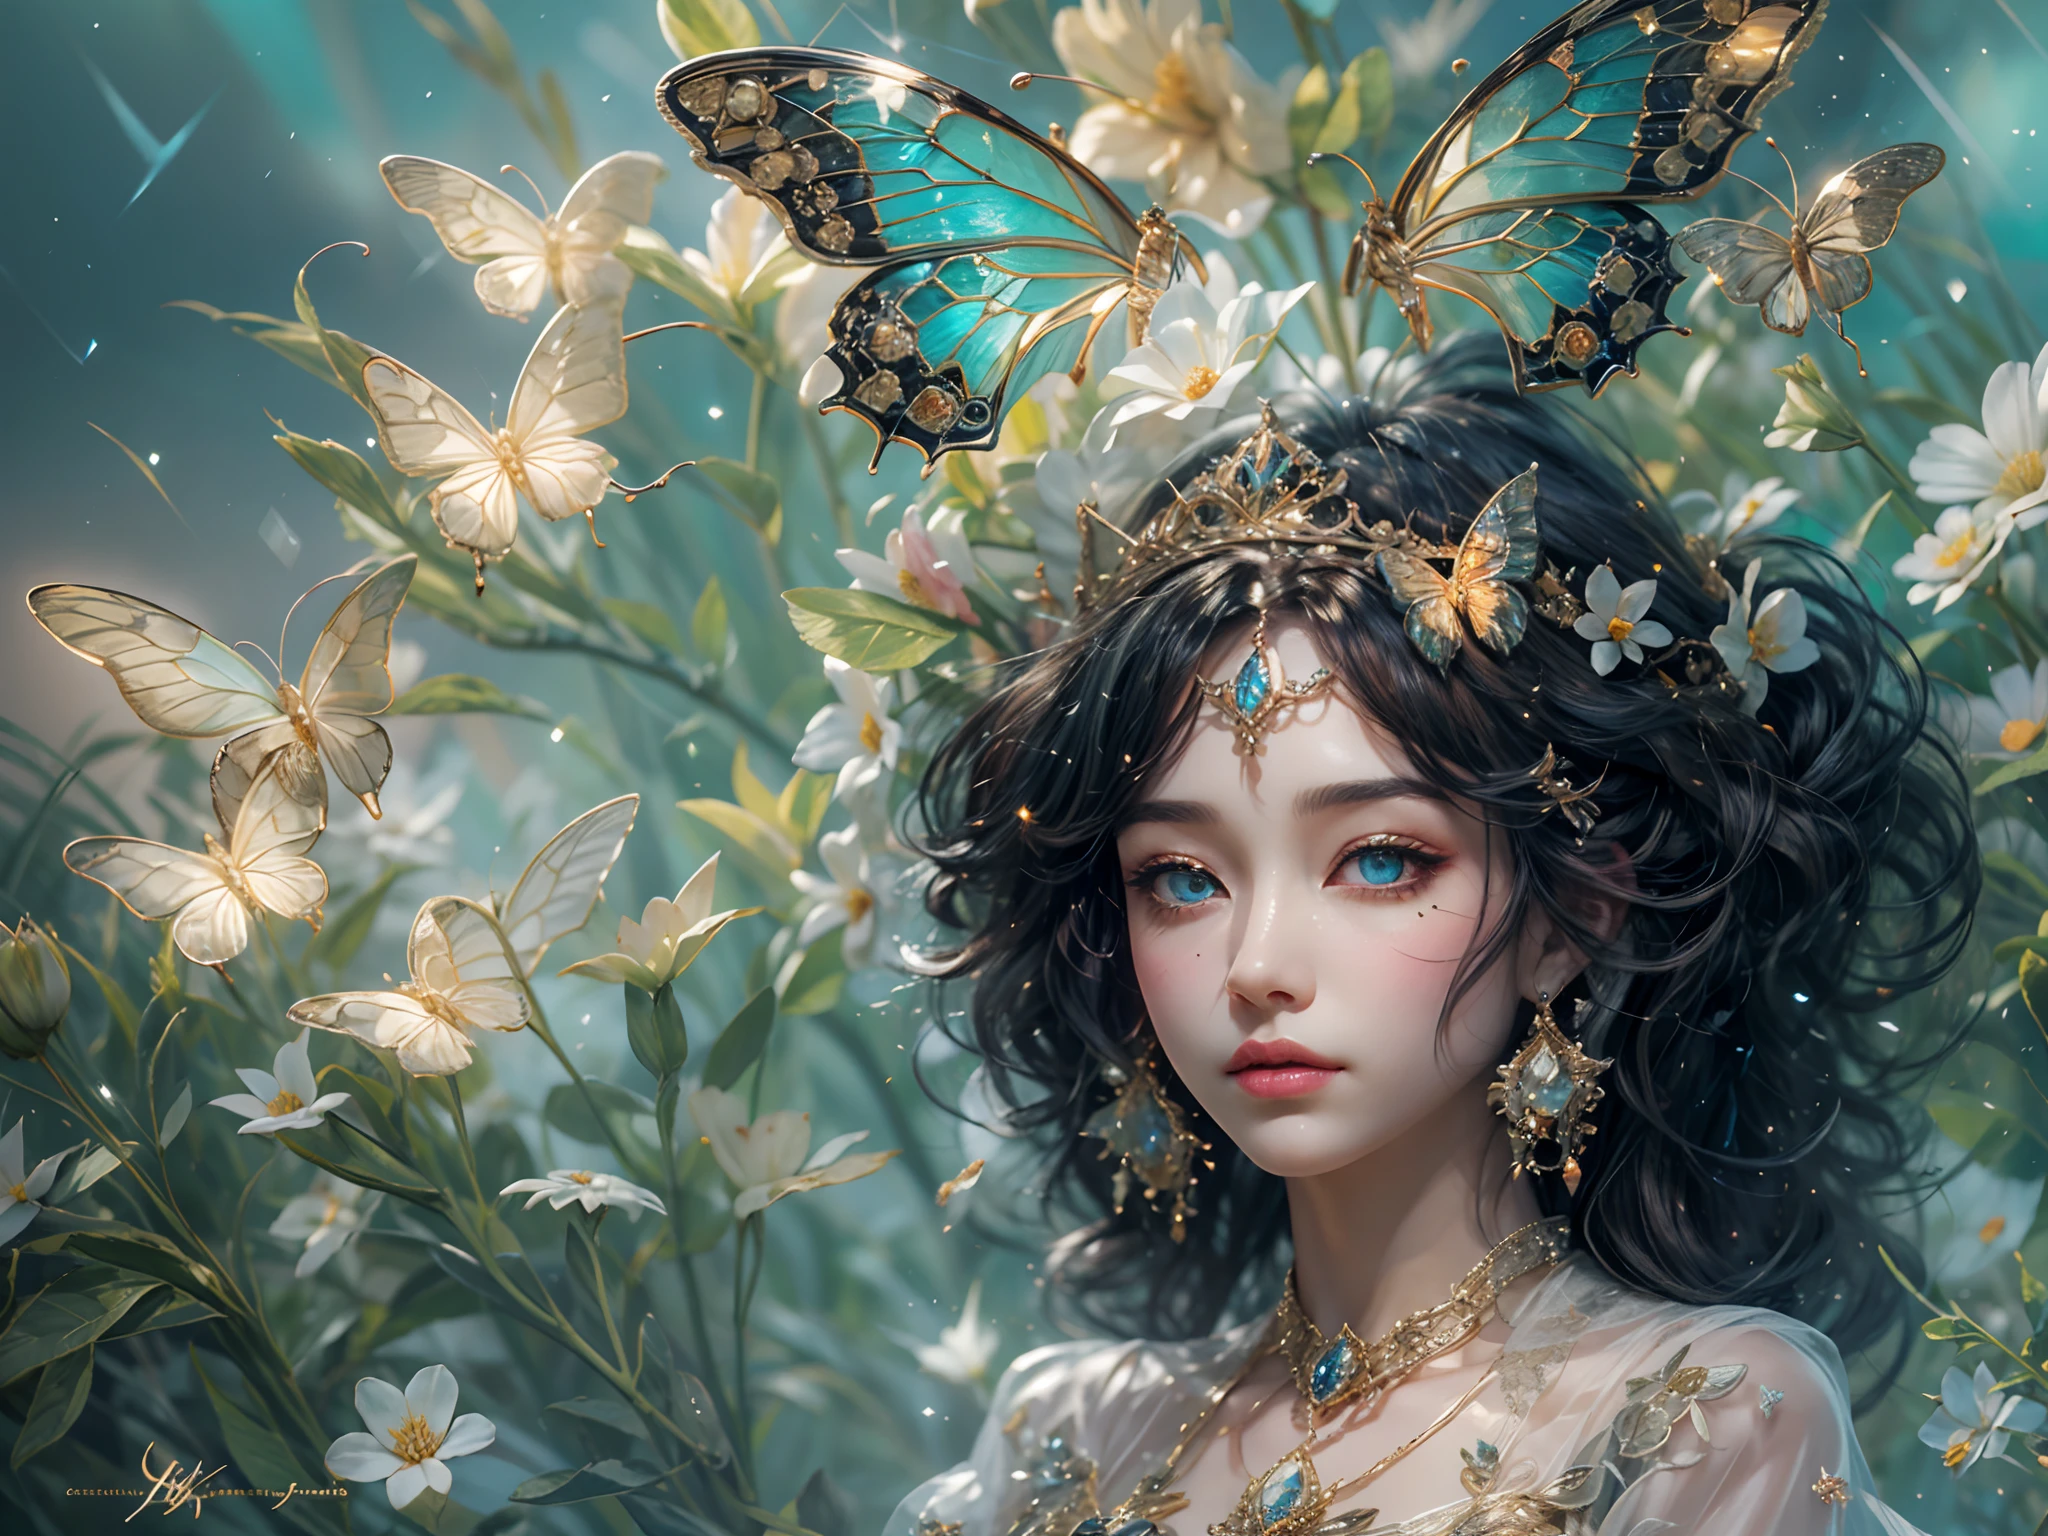 This is、It's a masterpiece of realistic fantasy with lots of sparkles, Glitter, and intricate ornate details. Produces one  woman with a beautiful delicate crown sitting on a garden swing at night. She is a beautiful and seductive butterfly queen with stunning curly black hair, (((Incredibly realistic and detailed dynamic eyes in bright colors with realistic shading))).  Her skin is translucent white, Her eyes are shining, And her dress is elegant. Her dress is spun with delicate and finest gossamer silk, Convoluted, Delicate floral details and gold silk butterfly sleeves. Her face is lovely and lonely. Include flowers that glow in the dark, Lots of particles, Highly realistic fantasy butte fly with translucent gem-colored wings and fine details, And shine. Artwork done in the style of Guviz、Trending fantasy titles from Artstation and Midjourney、Reminds of the masters of this genre. camera: Using dynamic composition techniques、Emphasizes ethereal delicacy and delicate details.